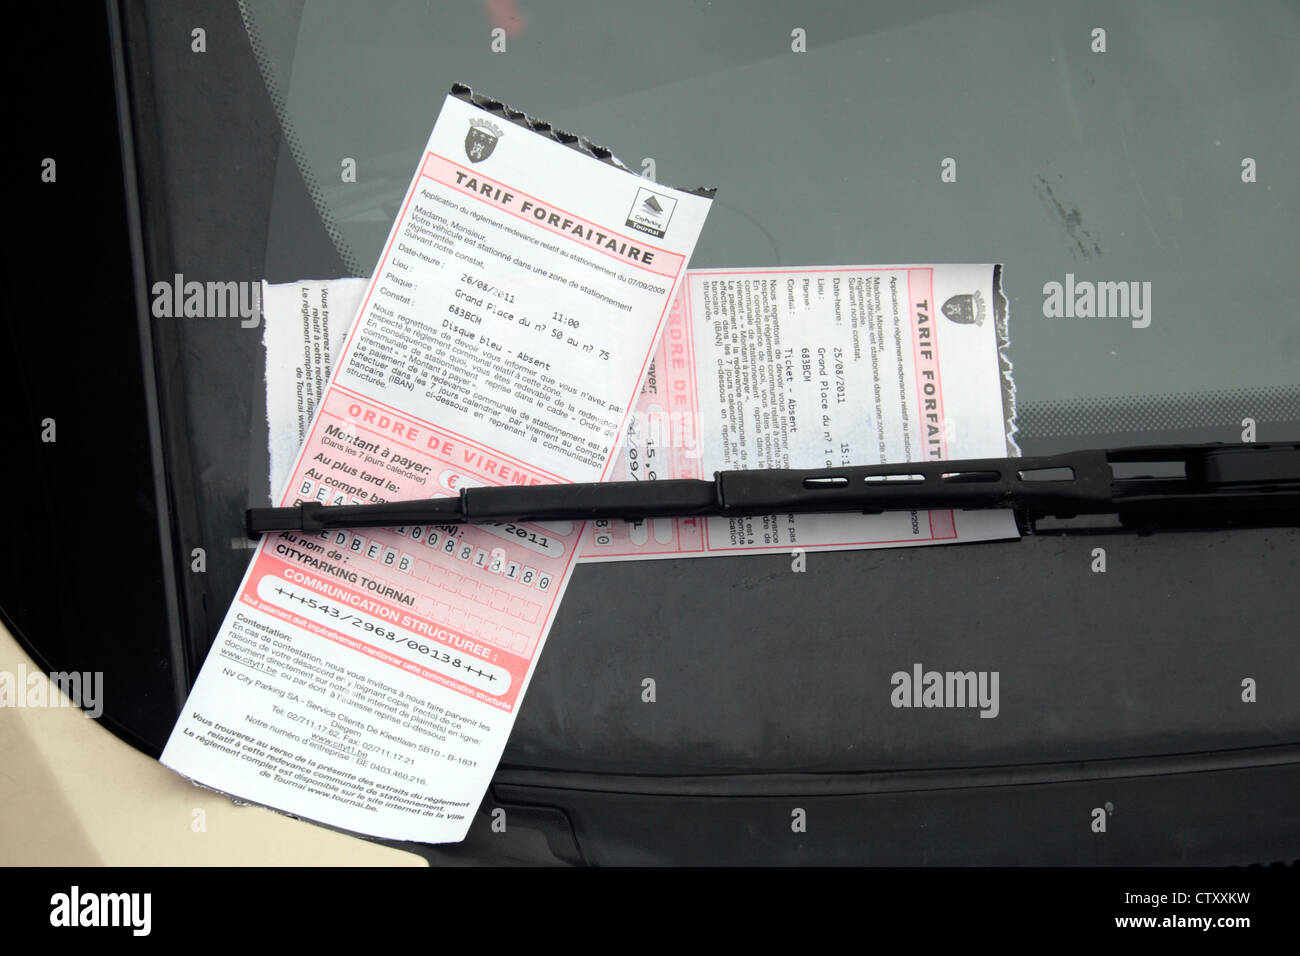 Belgian Tarif forfaitaire (flat rate/fixed penalty) parking tickets on a car windscreen in Tournai, Belgium. Stock Photo